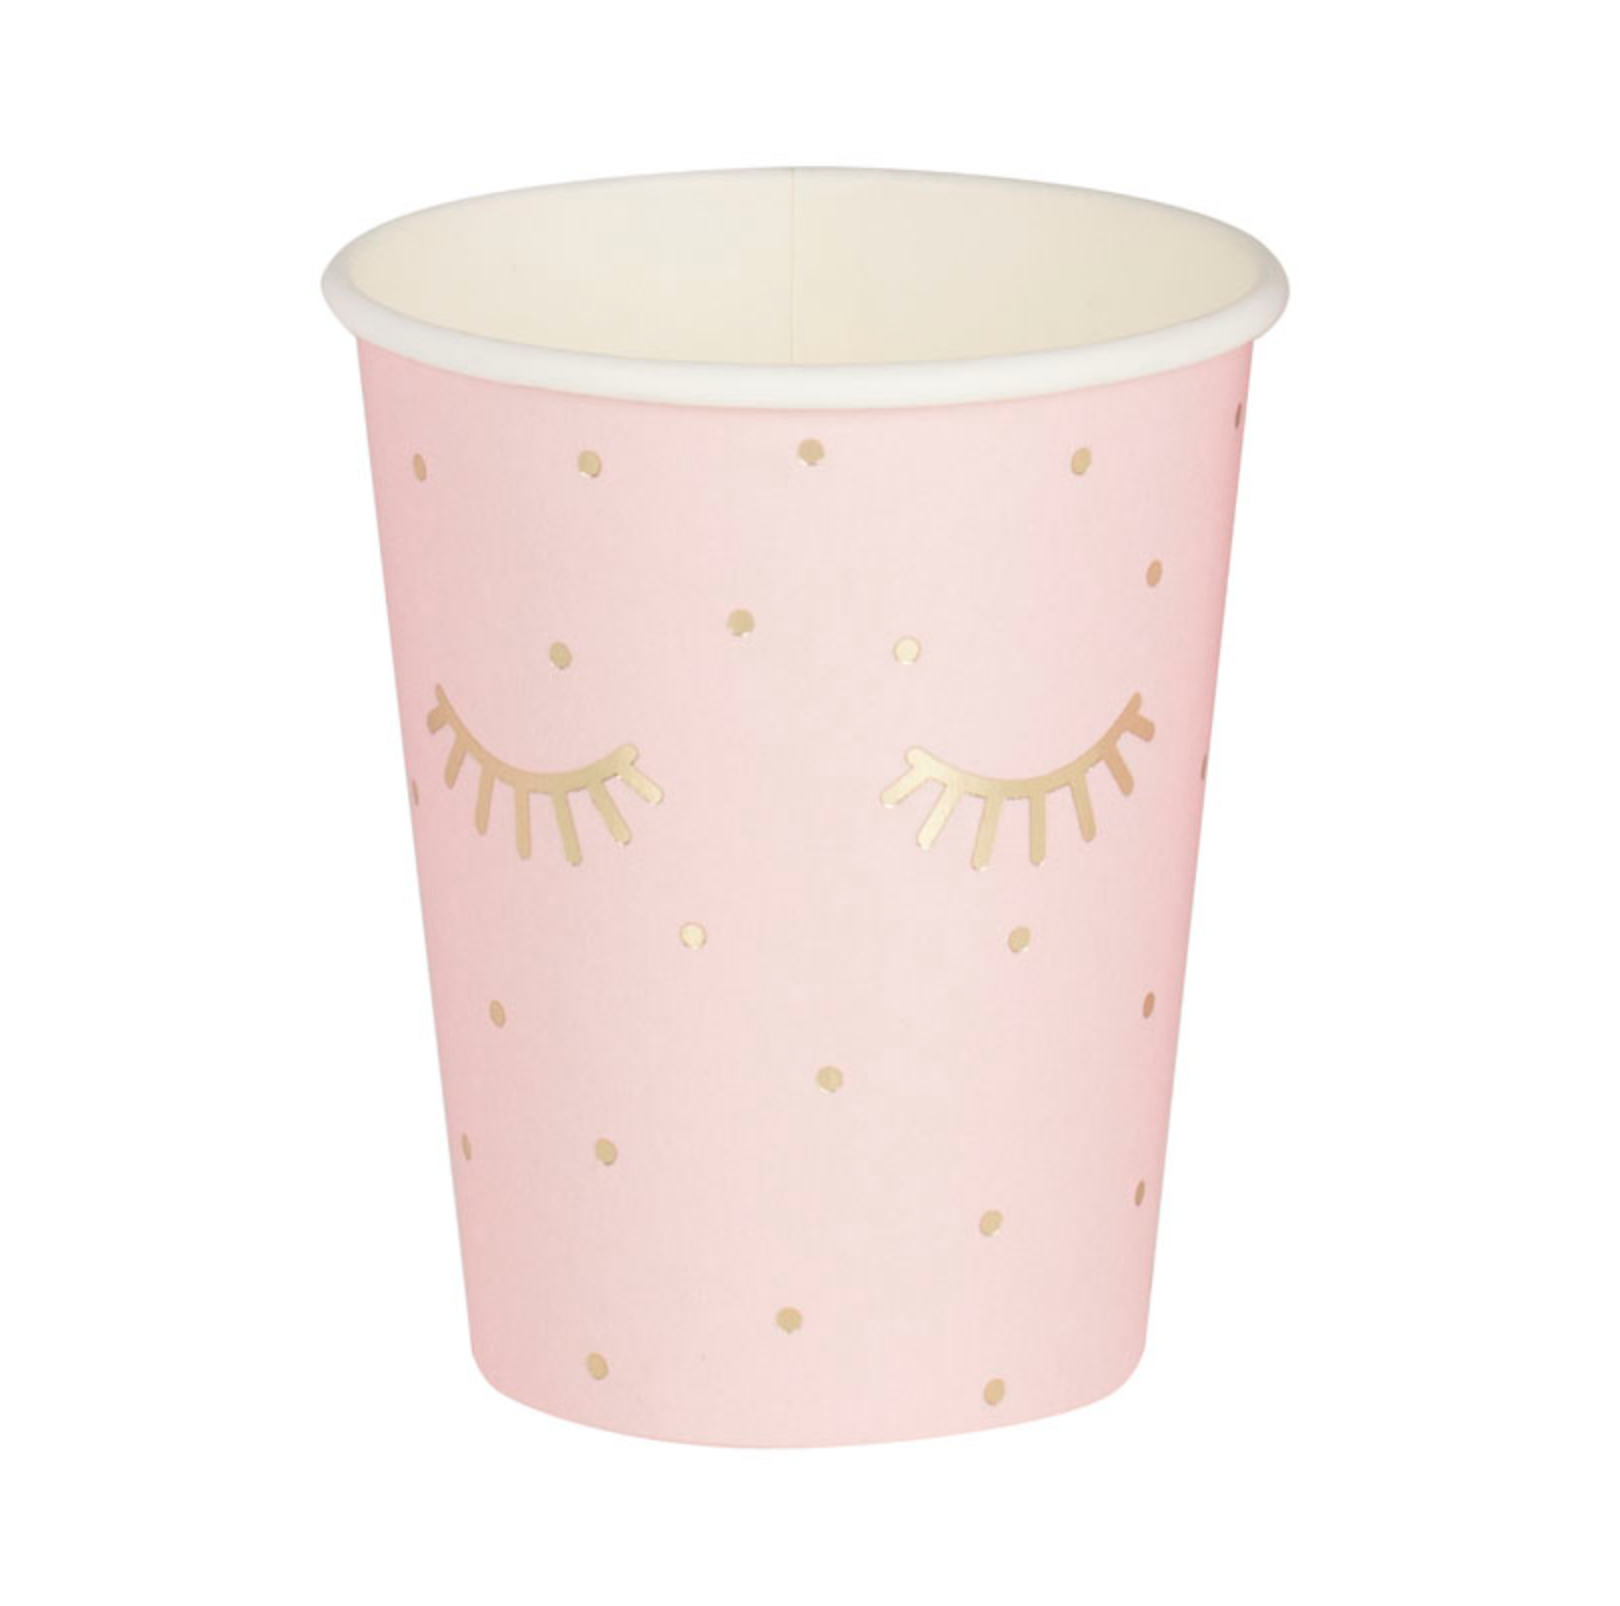 Sleepover / Pamper Party - Paper Cups